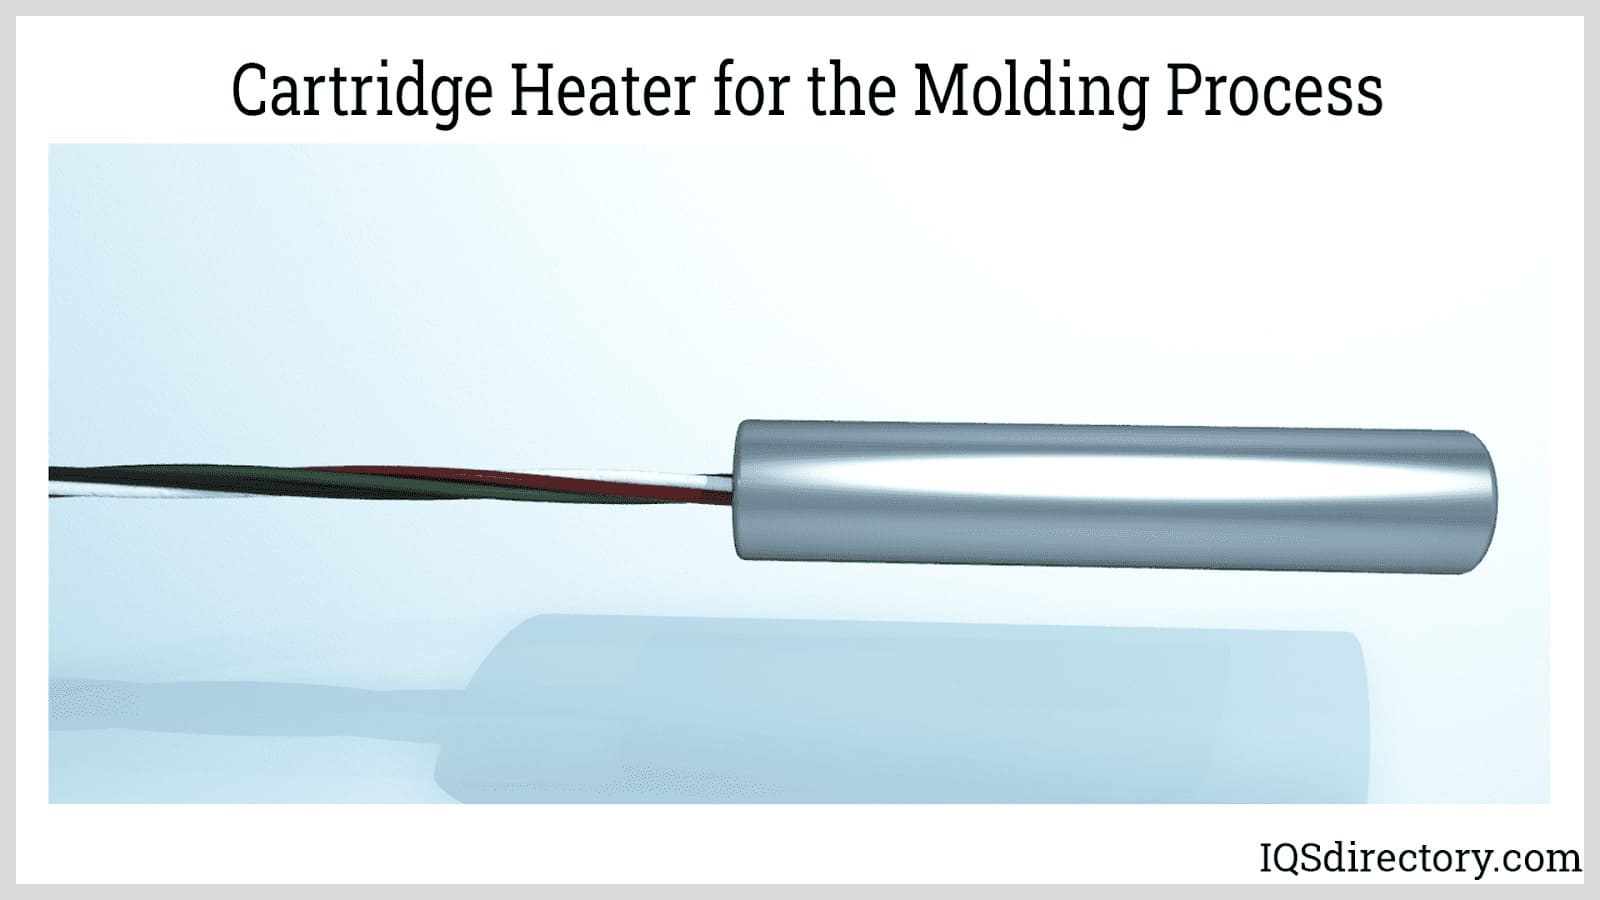 Cartridge Heater for the Molding Process